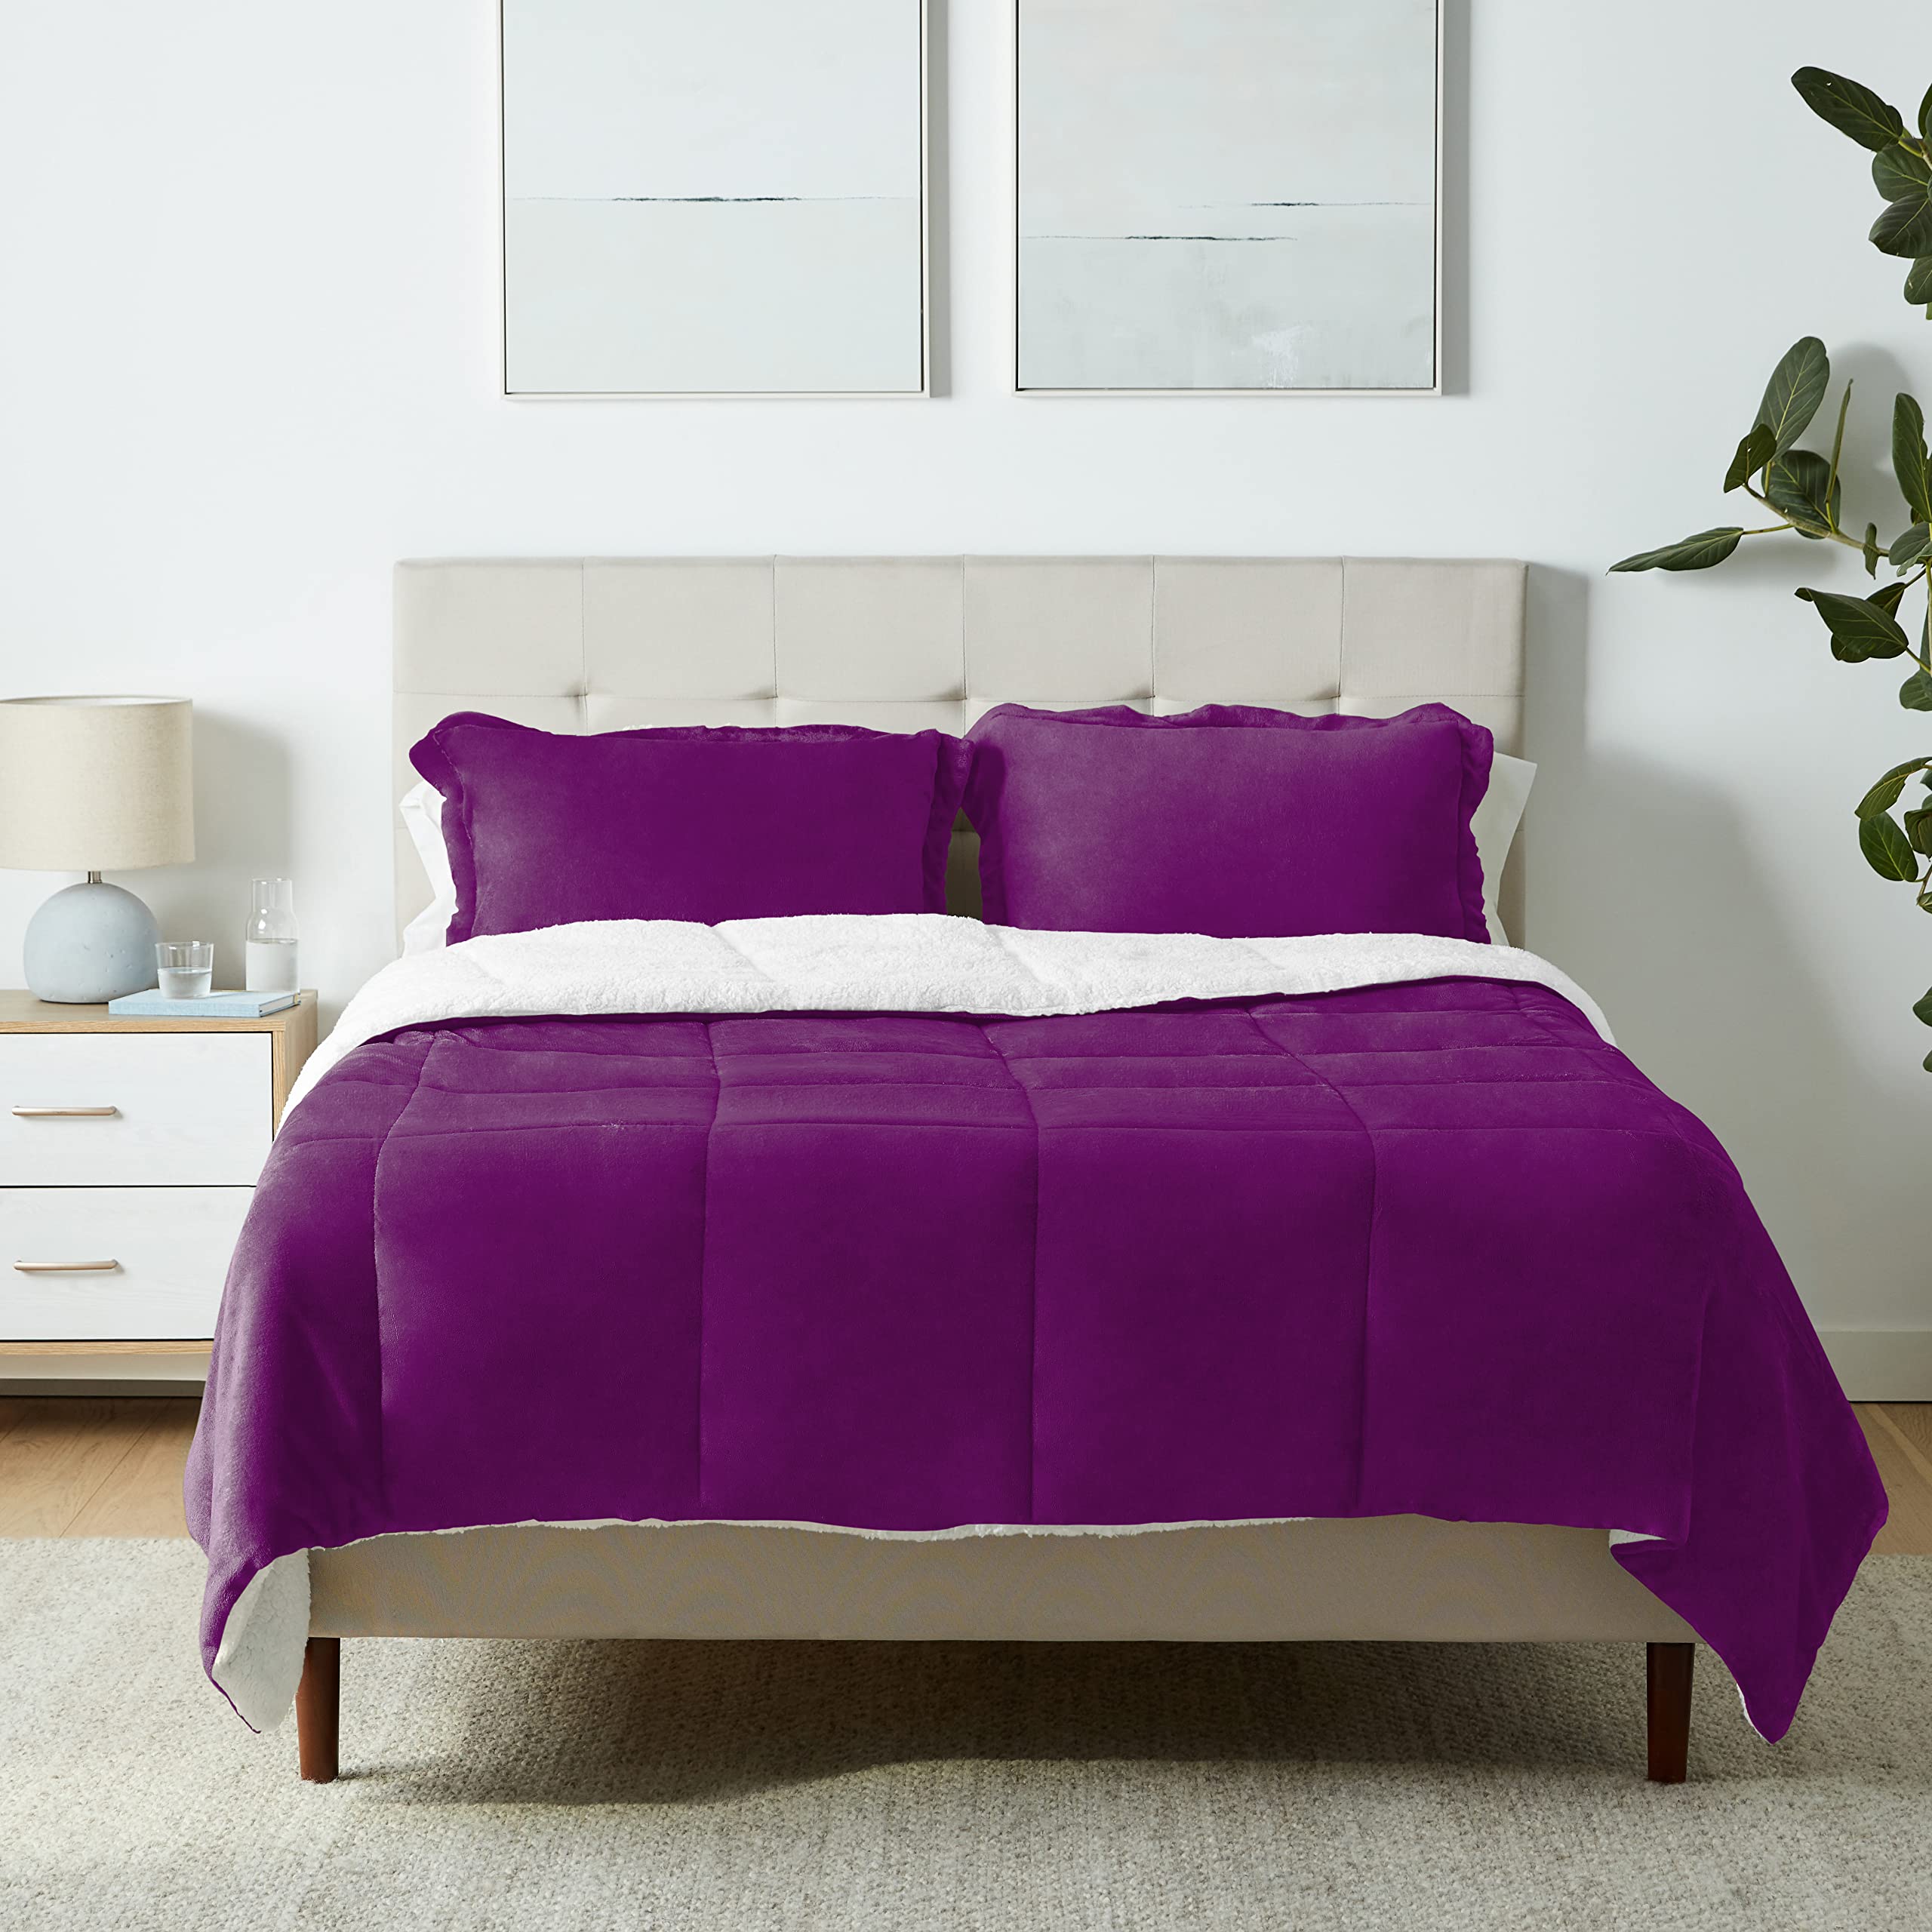 Book Cover Amazon Basics Ultra-Soft Micromink Sherpa Comforter Bed Set - Plum, Full/Queen